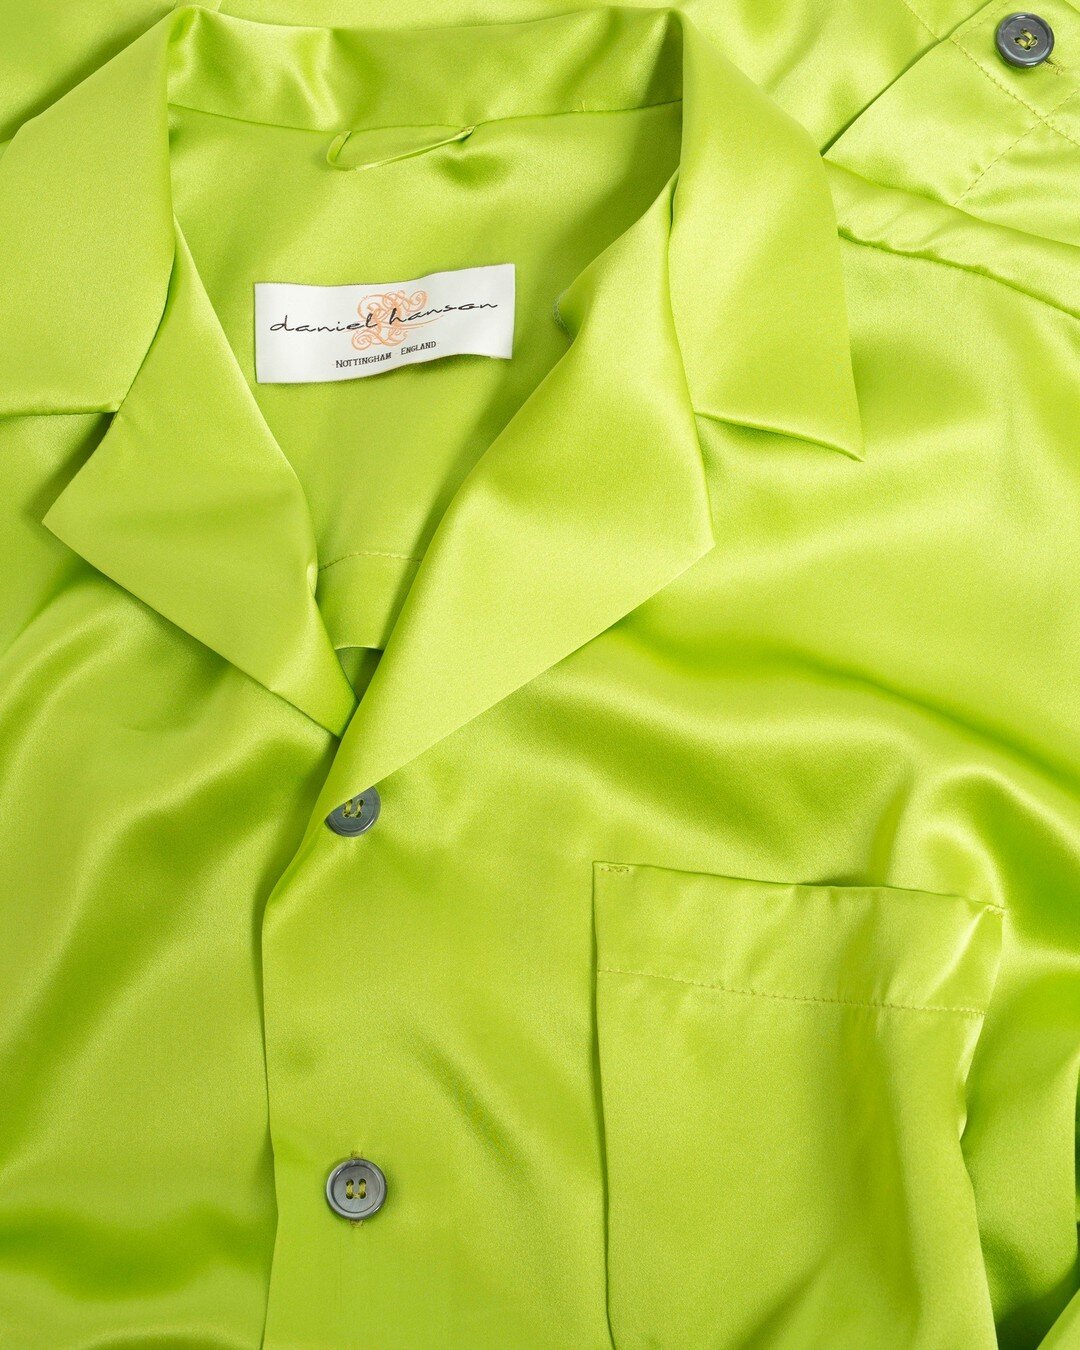 Hyper colourful new designs inspired by Nicholas Hanson&rsquo;s artisanal creations are perfect for keeping some sunshine close during the darker seasons. 

Our lime green pure silk satin pyjamas are a statement set in a refreshing and bold hue. Cut 